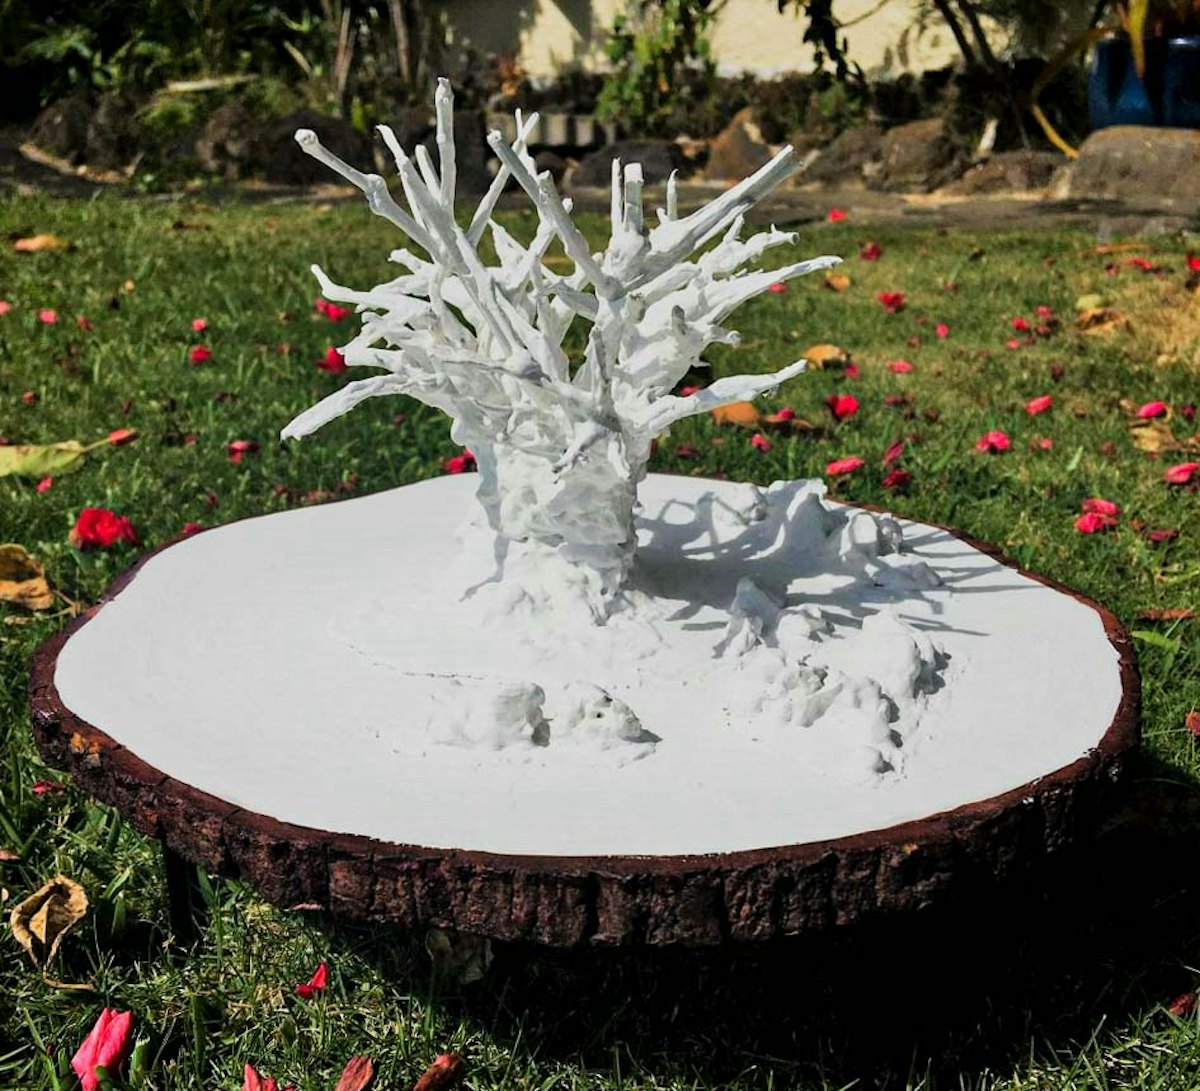 A sculpture made by an artist in Guam, Mariana Islands, inspired by the following passage from a talk given by ‘Abdu’l-Bahá: “The reality of man is his thought.”